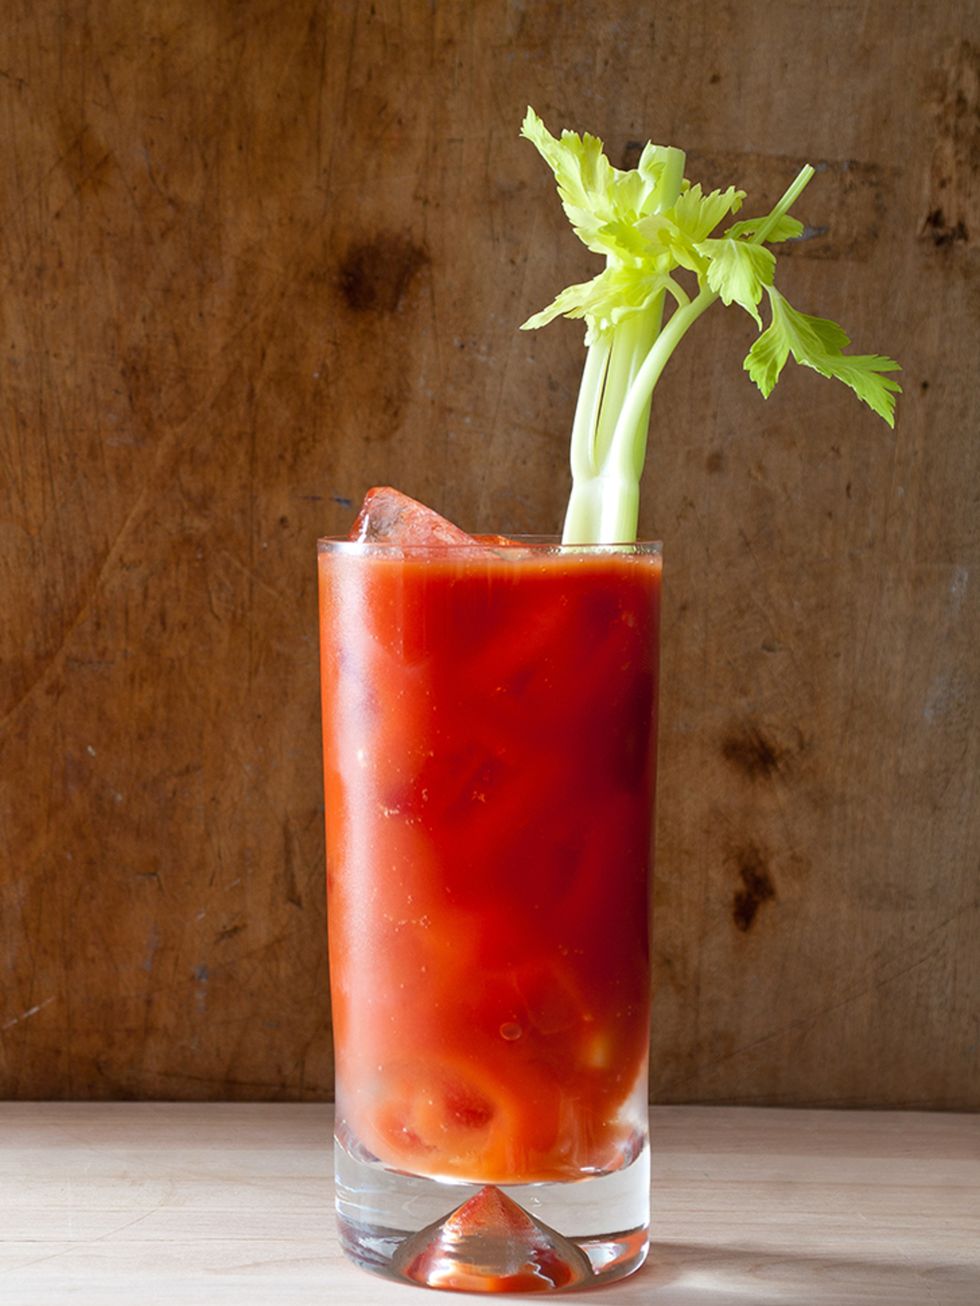 <p><strong>Where: Drinking on a Sunday</strong></p>

<p>Bloody Mary (Vodka, tomato juice, horseradish, Worcestershire sauce, Tabasco, celery and pepper)</p>

<p>If you want to be a step ahead, you can make your own tomato juice or even just throw fresh ch